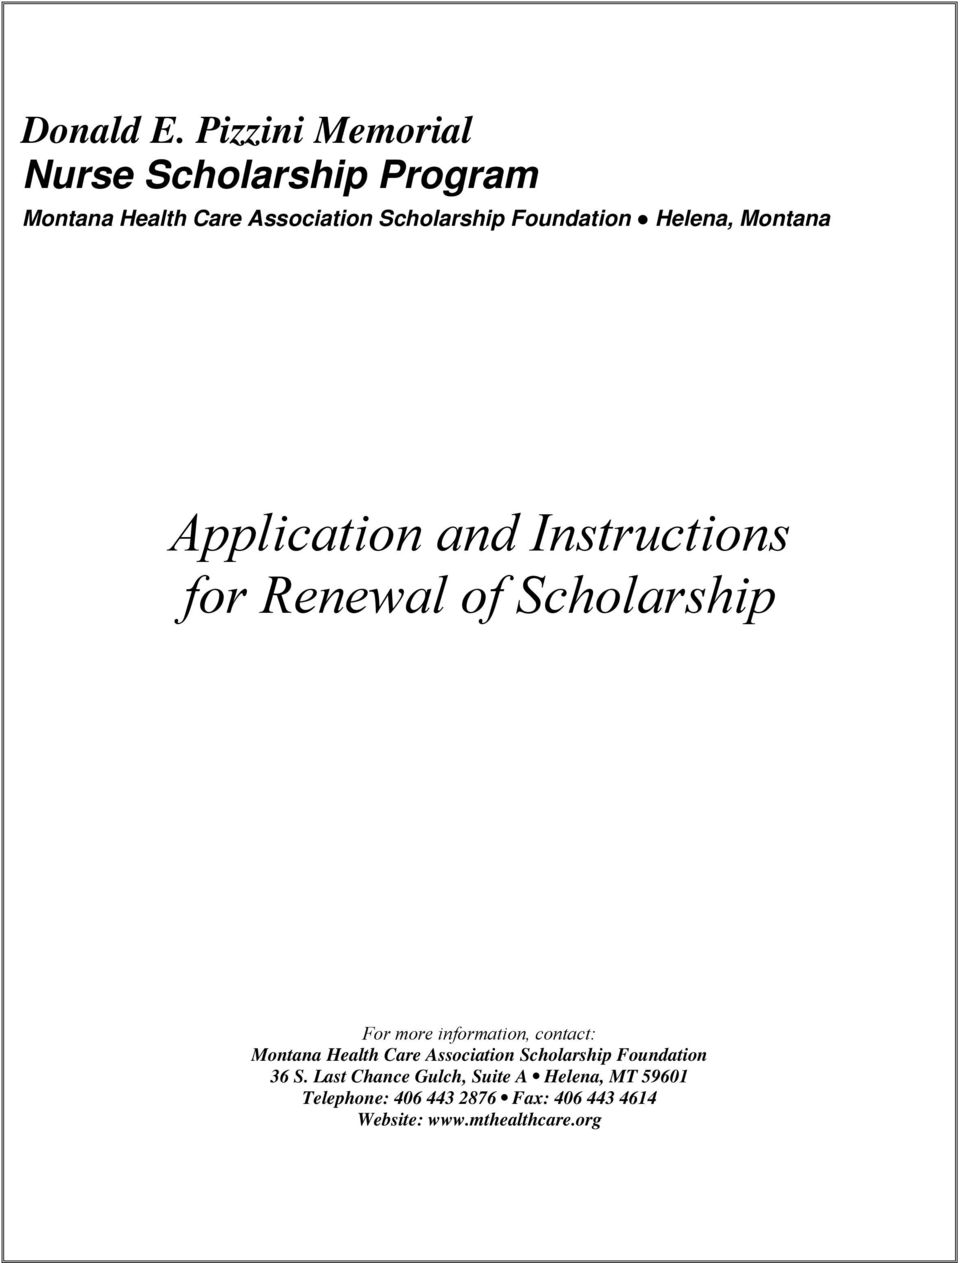 Foundation Helena, Montana Application and Instructions for Renewal of Scholarship For more